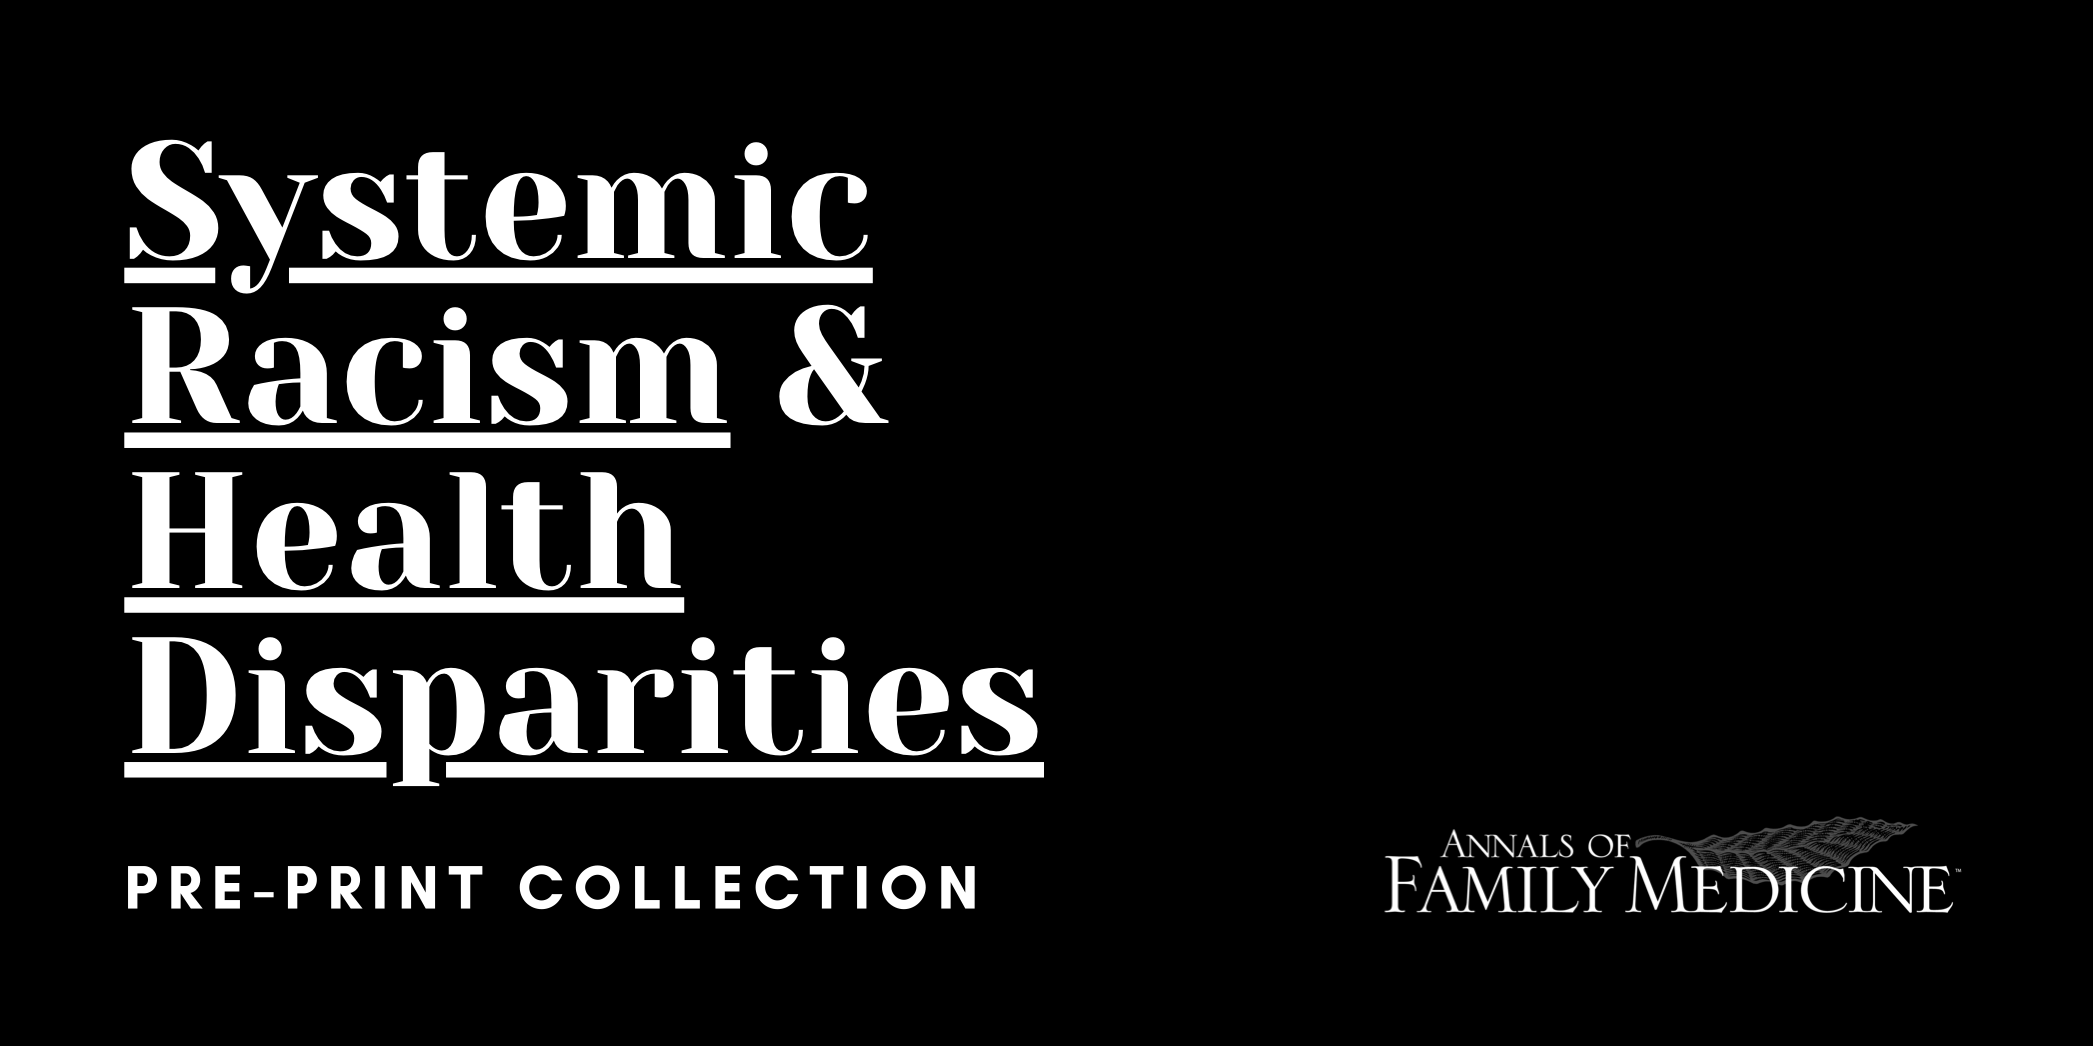 Systemic racism and health disparities annals of family medicine pre-print collection